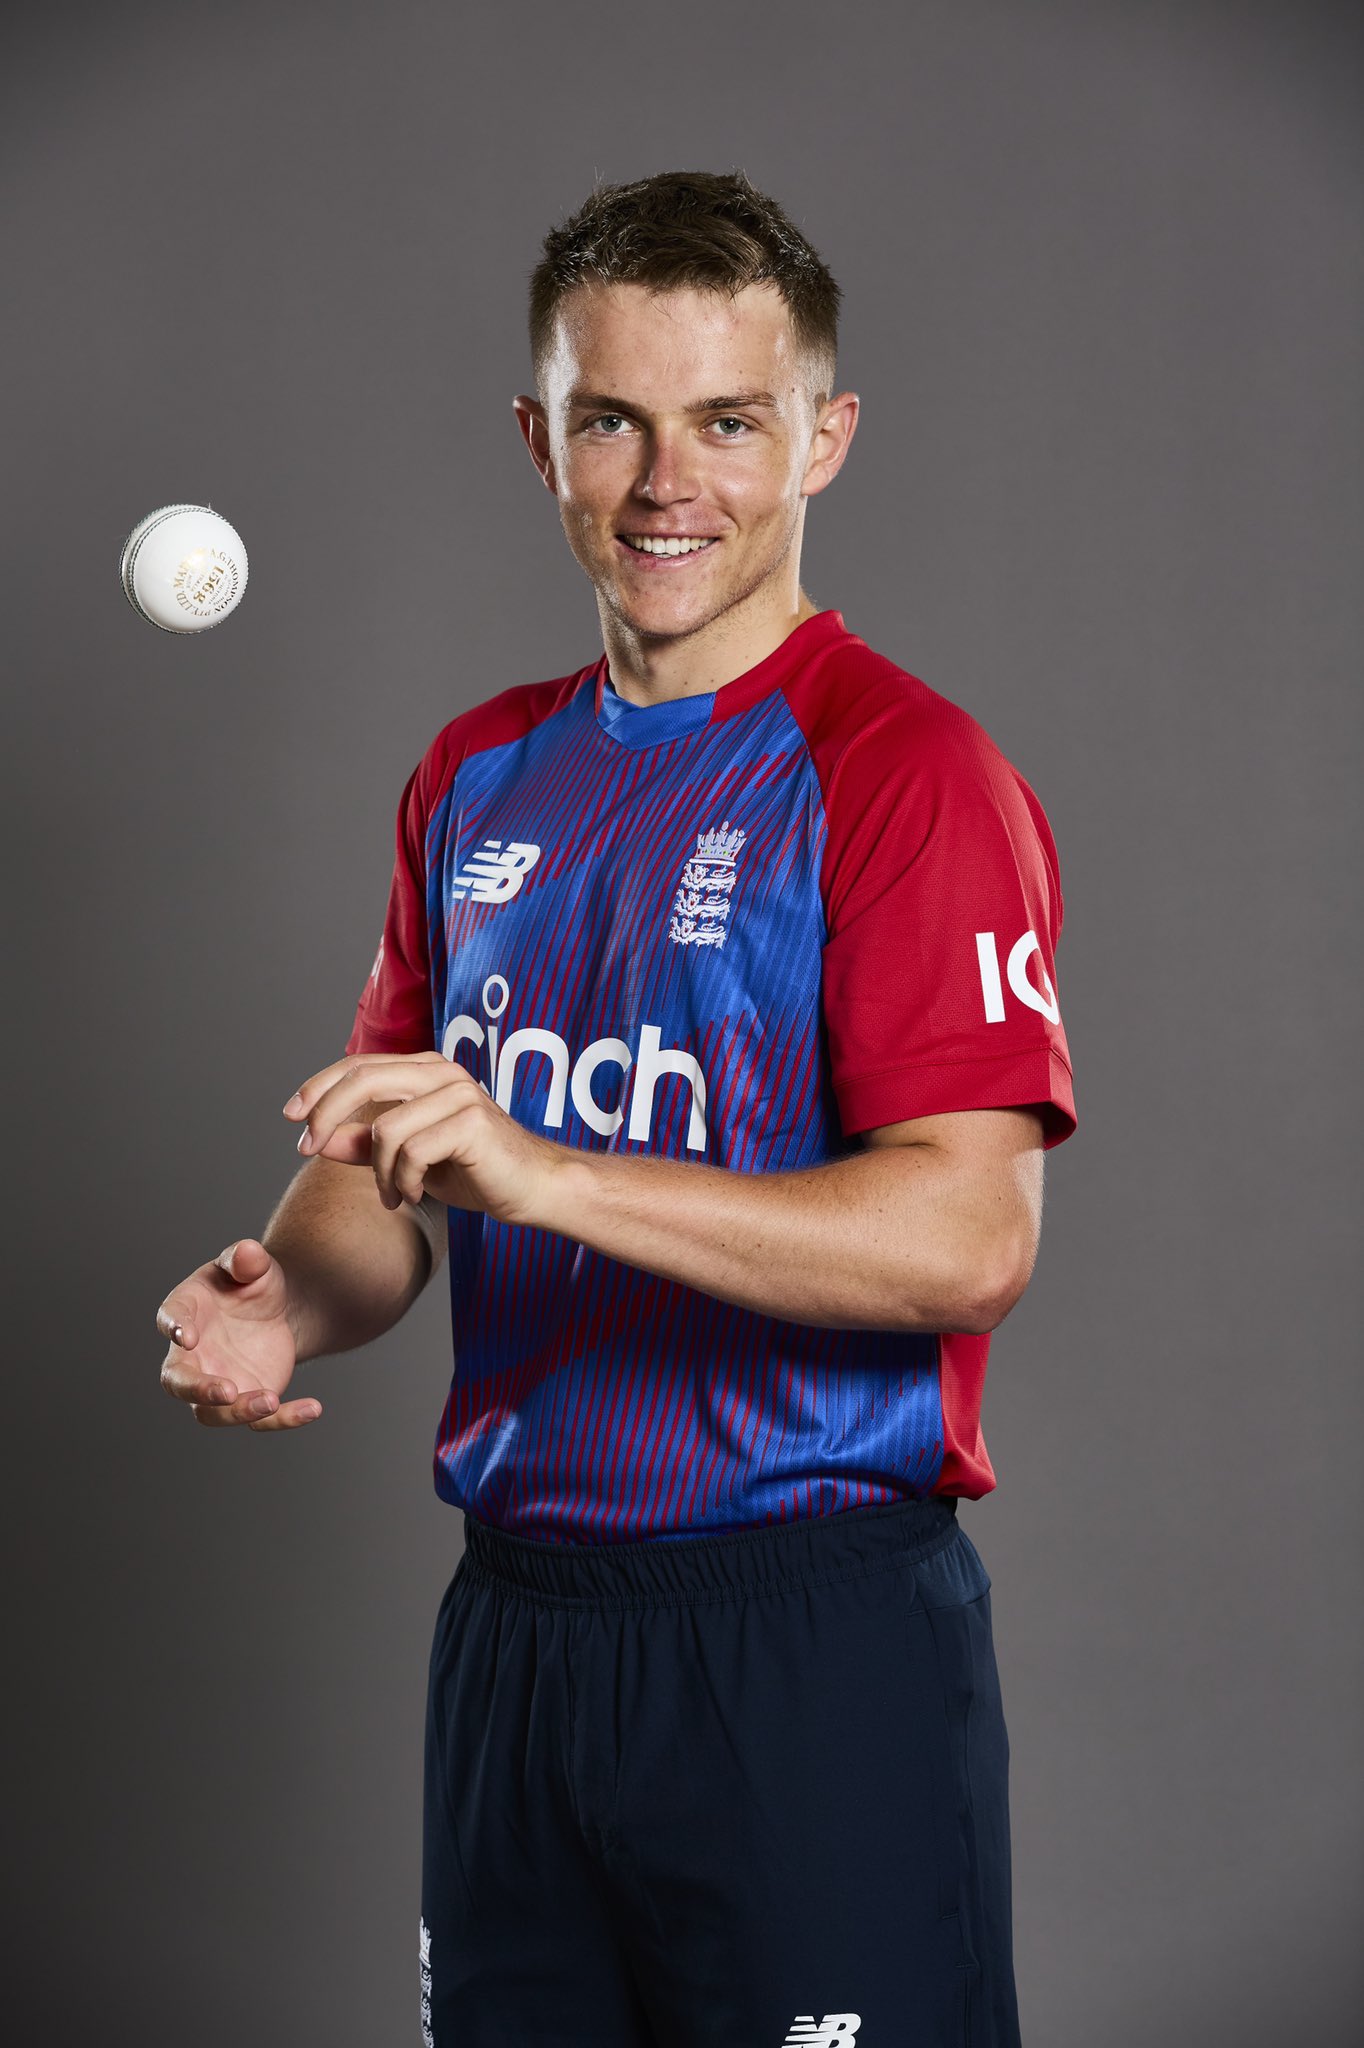 Sam Curran ruled out of T20 World Cup after picking up back injury during CSK's IPL game